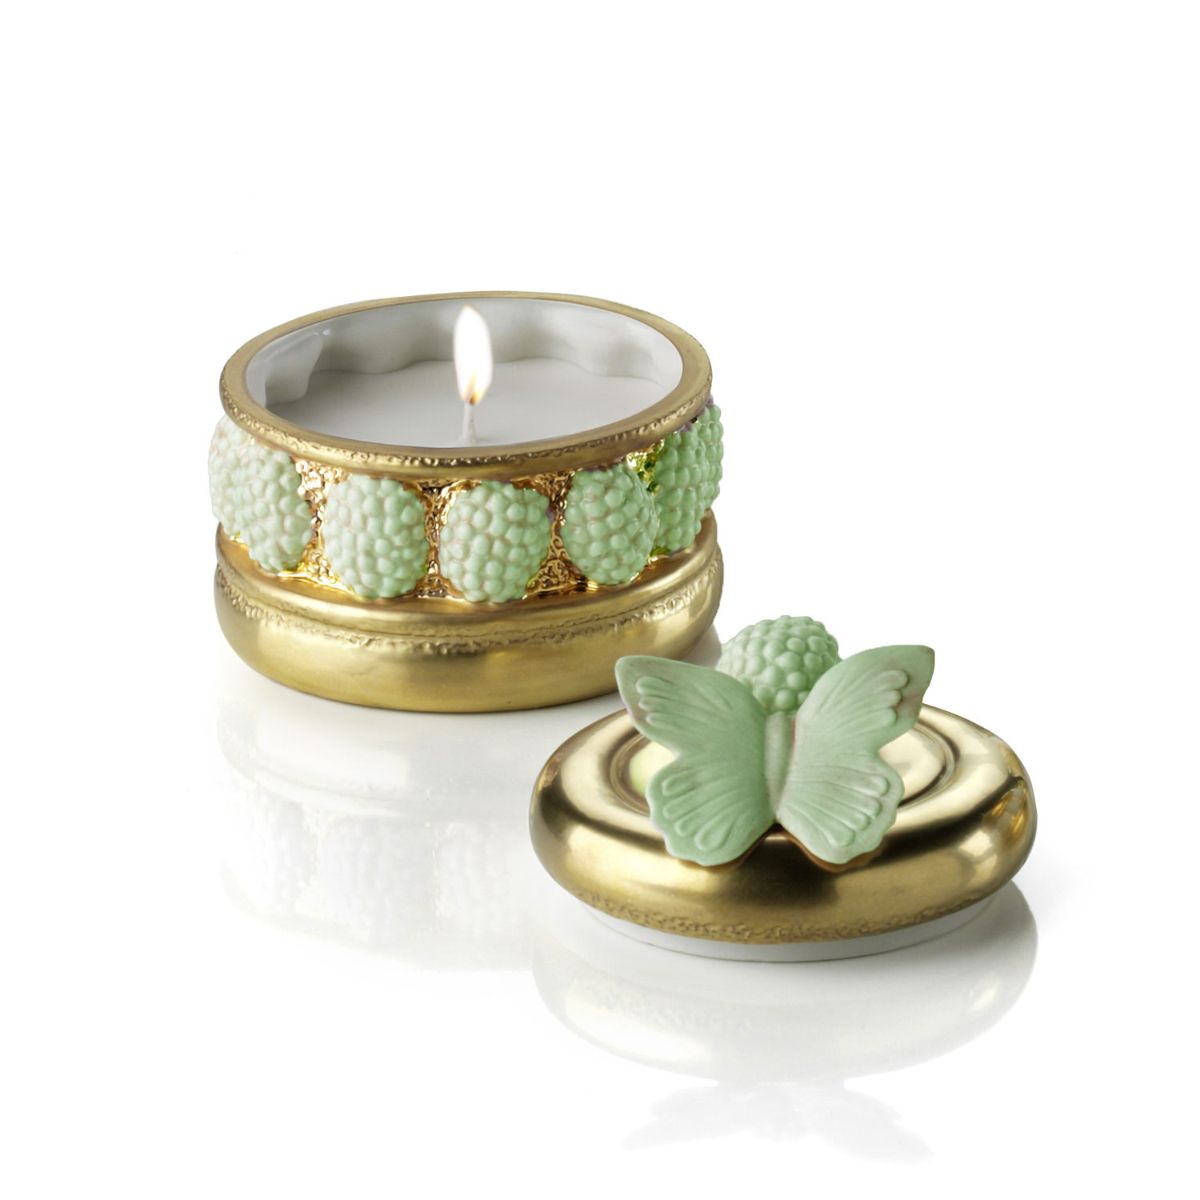 Chantilly Ispahan Pia Cake Scented Candle - Gold & Green